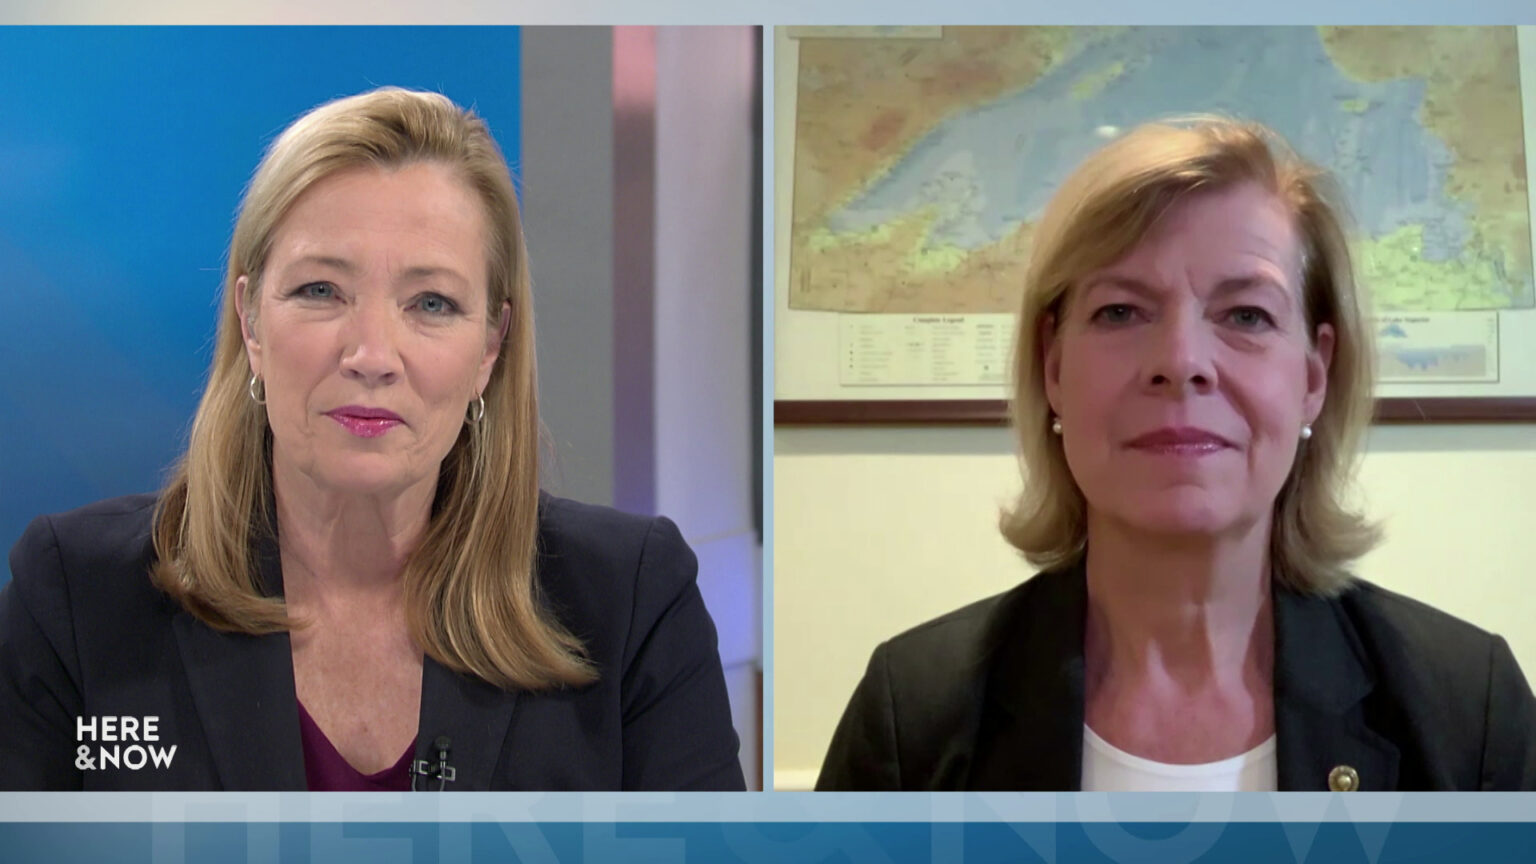 A split screen shows Frederica Freyberg and Tammy Baldwin in different locations.